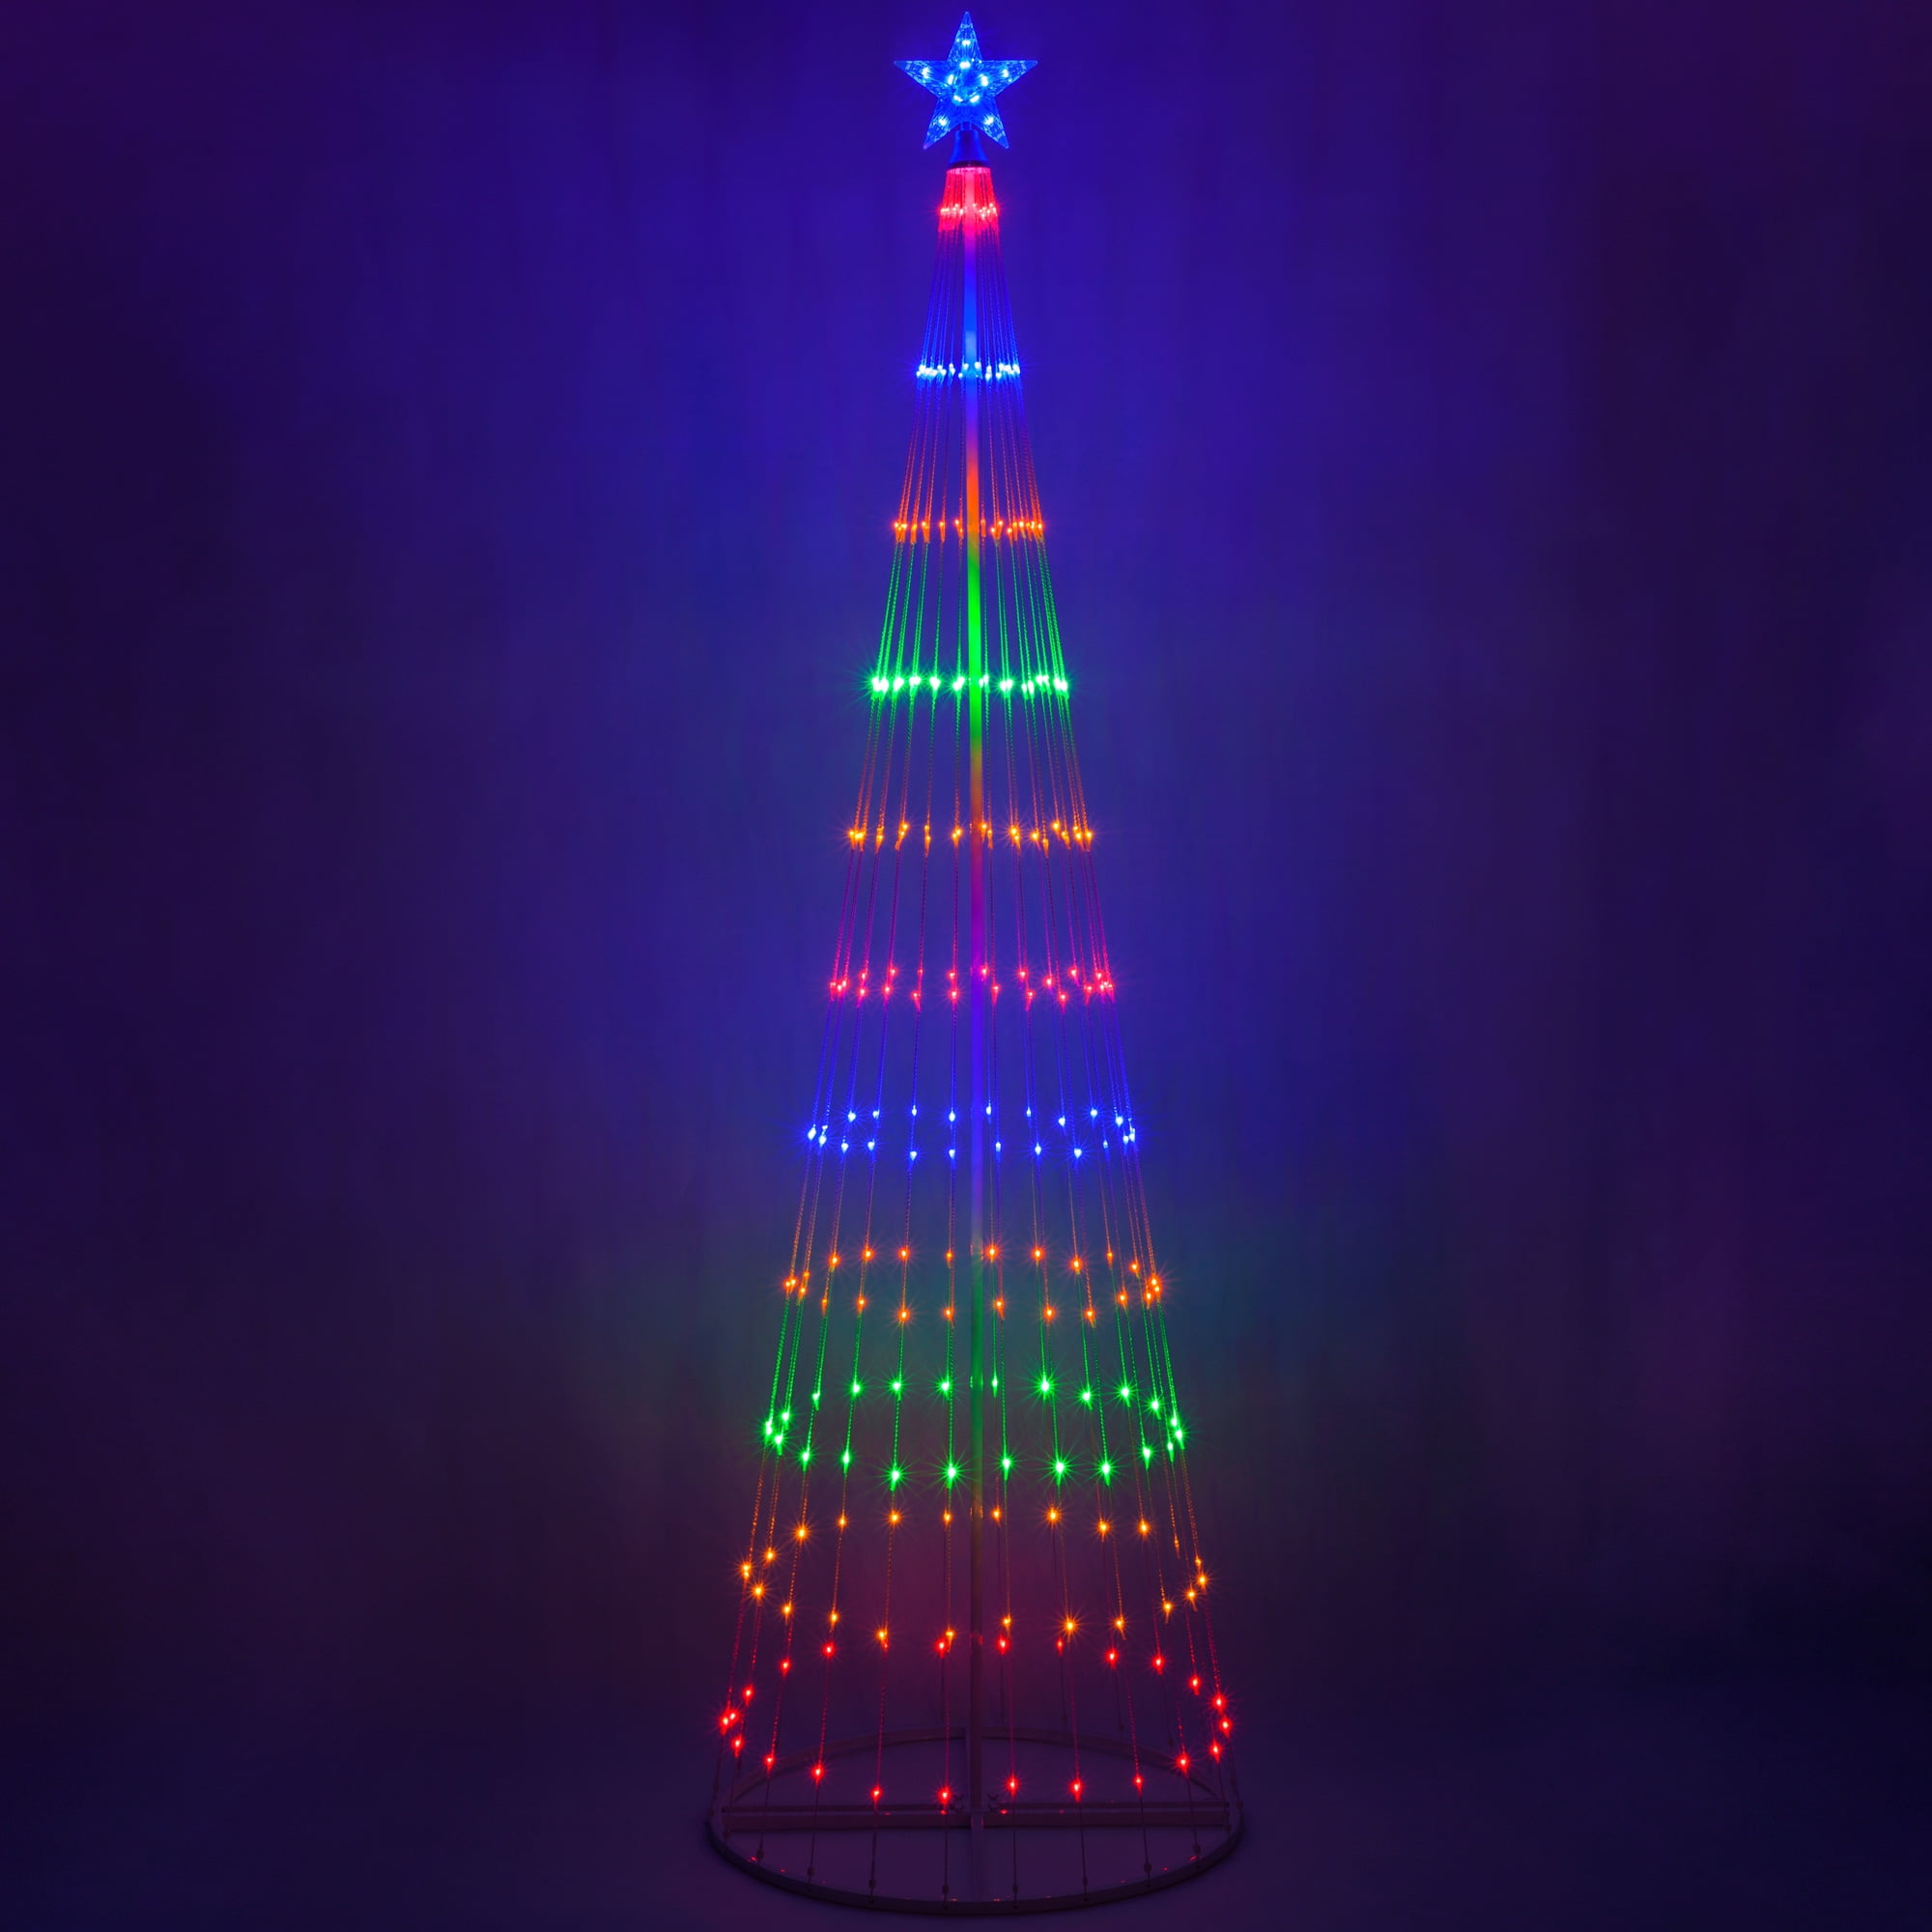 Outdoor Christmas Decorations Wintergreen Lighting 6' Multi Color 14-Function LED Light Show Cone Christmas Tree